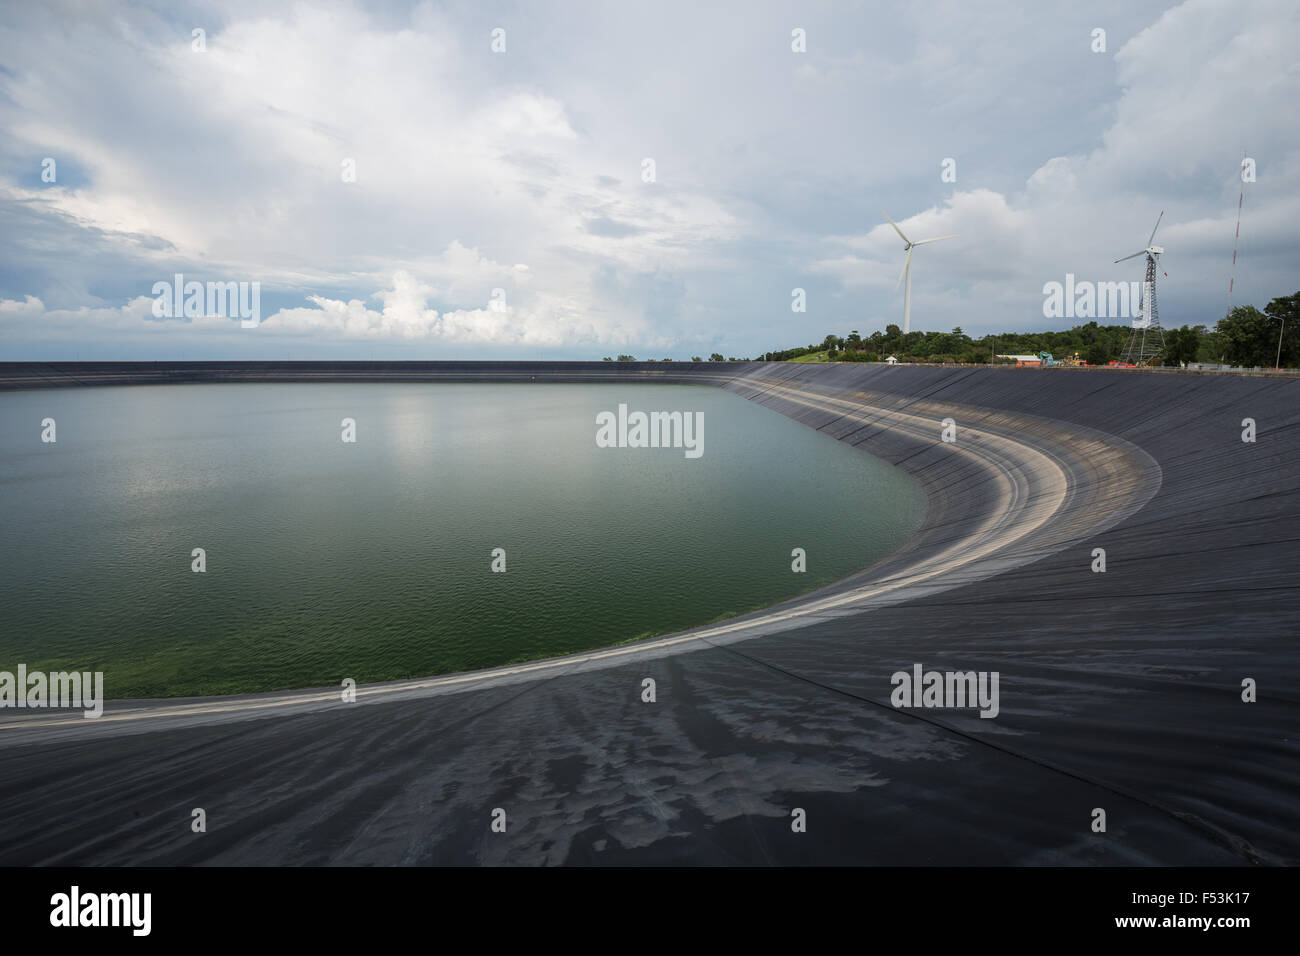 Lam Takong reservoir (water reservoir with plastic liner), Nakhon Ratchasima, Thailand Stock Photo